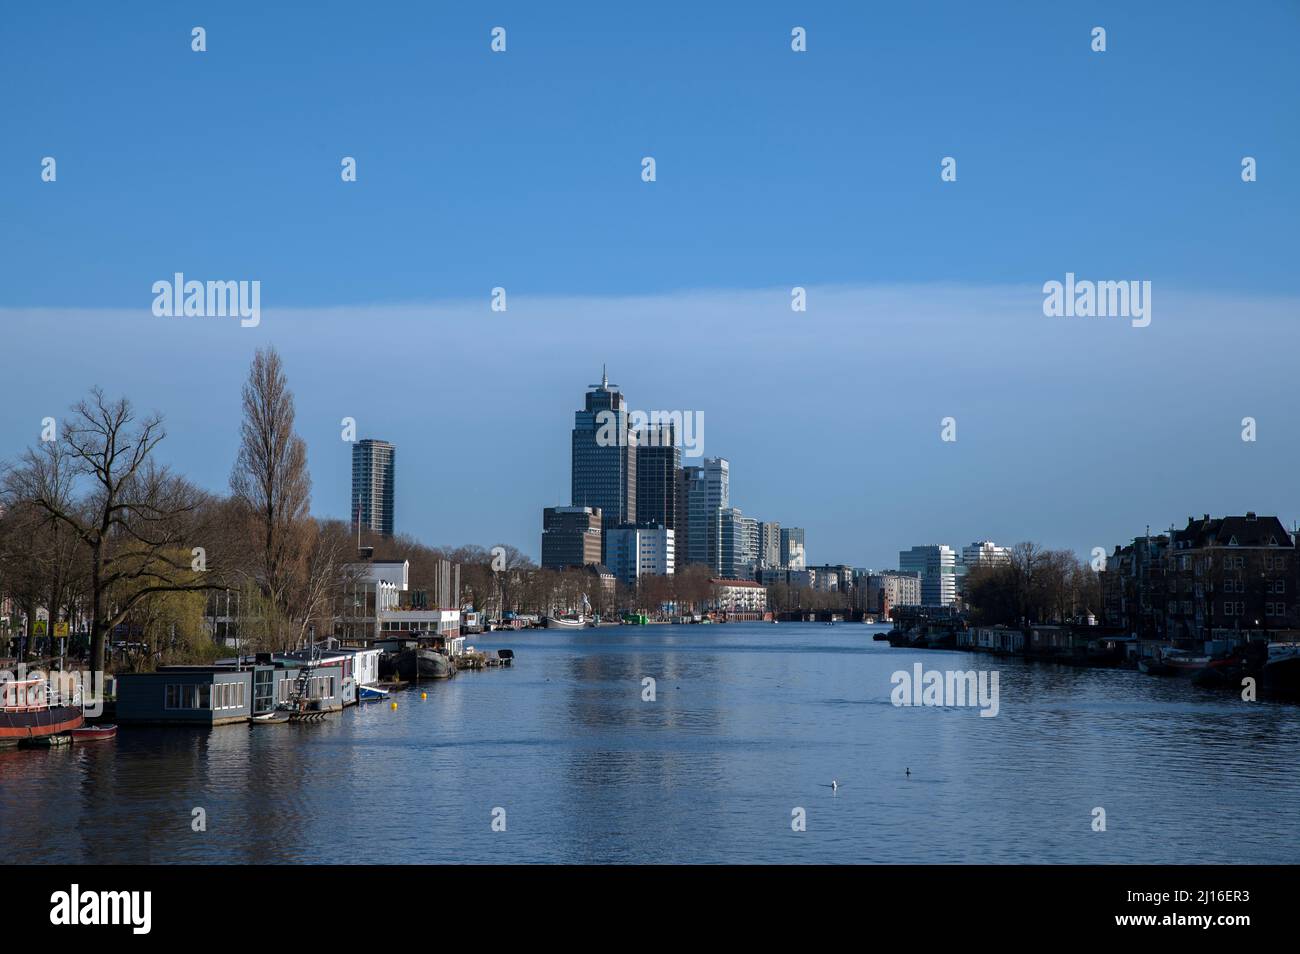 View From The Nieuwe Amstelbrug Bridge At The Amstelriver Amsterdam The Netherlands 17-3-2022 Stock Photo